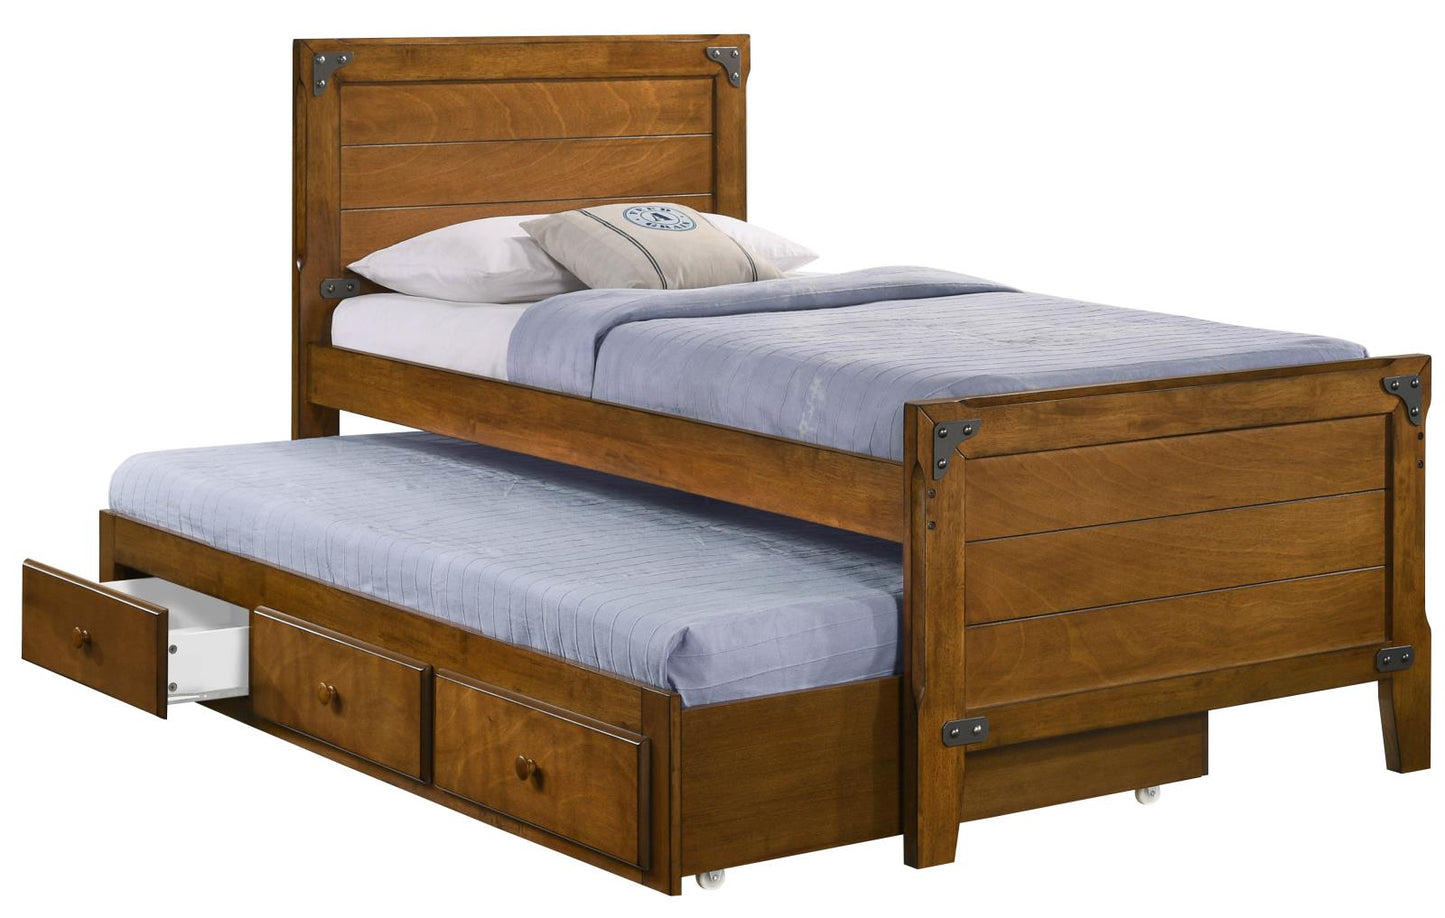 Granger - TWIN BED W/ TRUNDLE